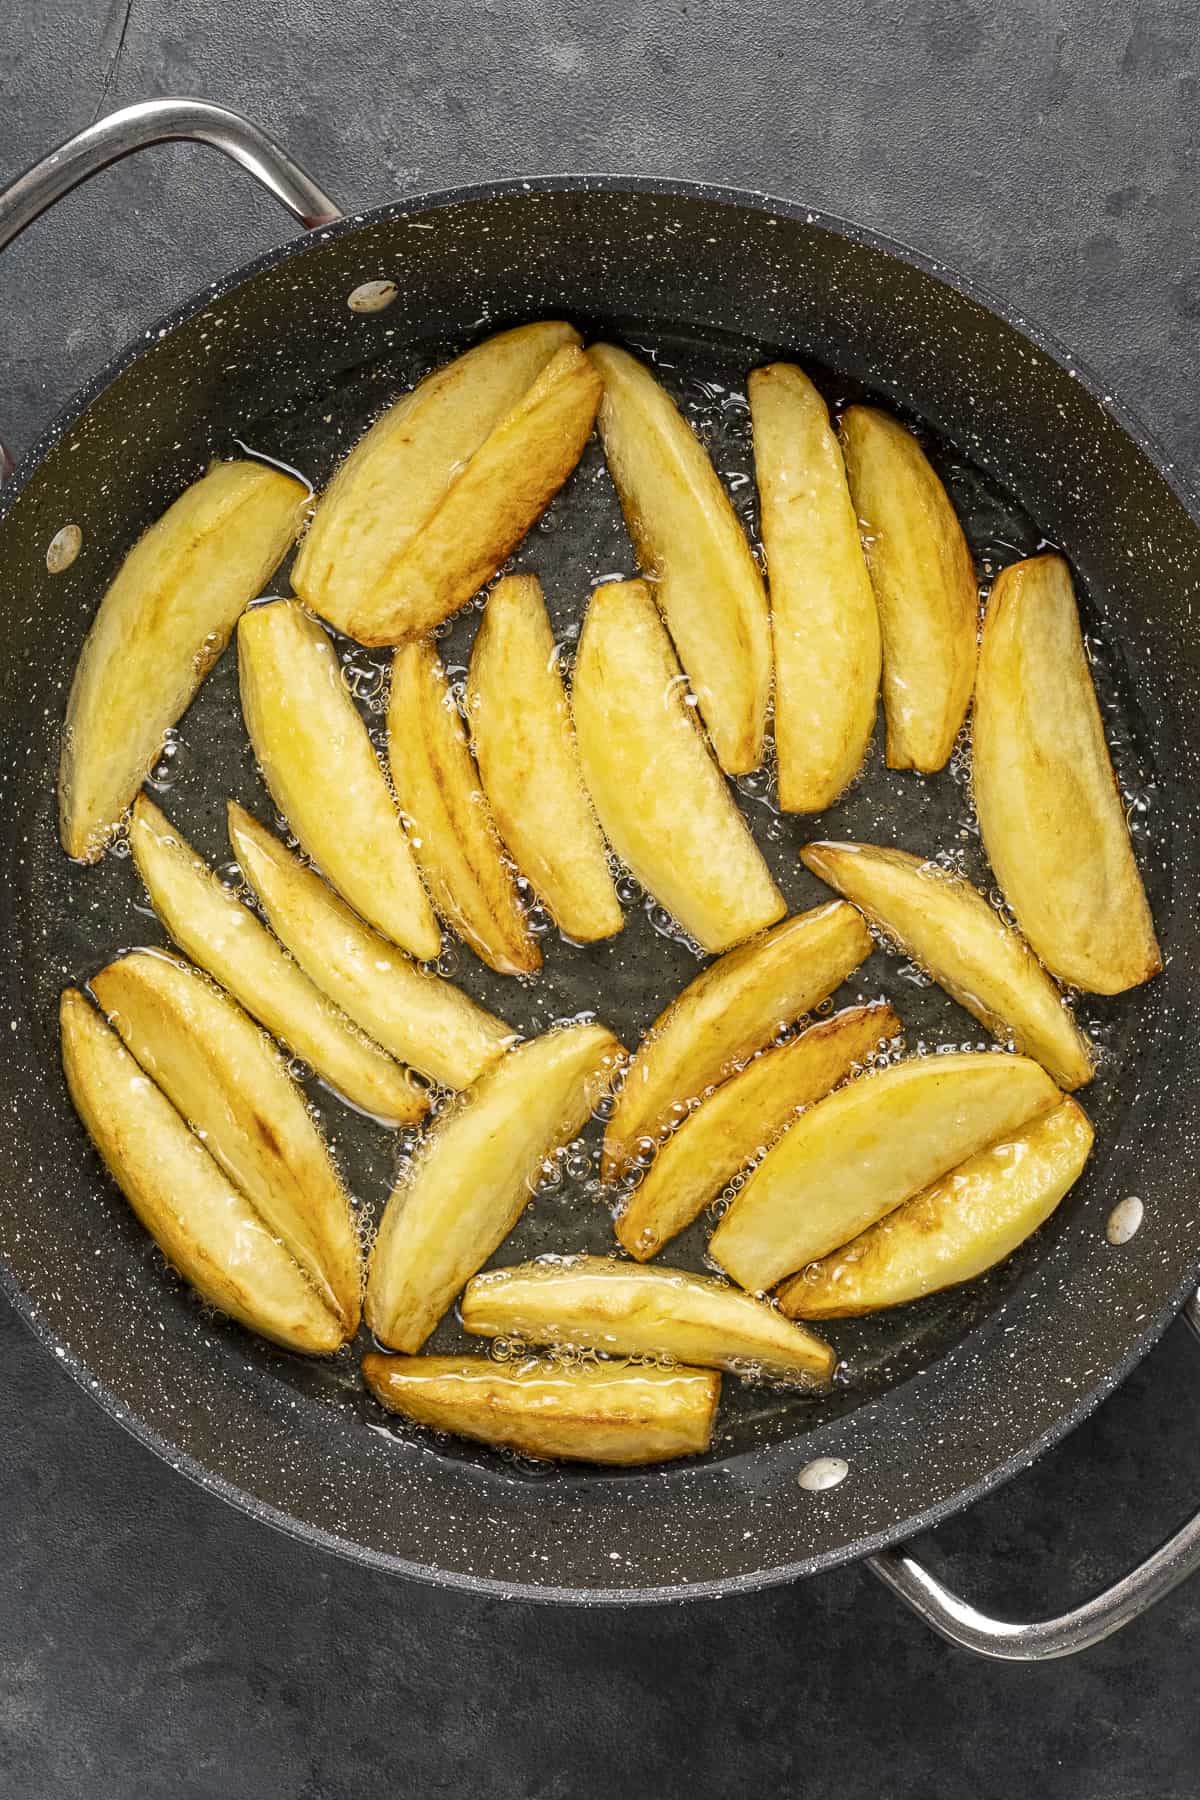 Potato slices frying in a pan.